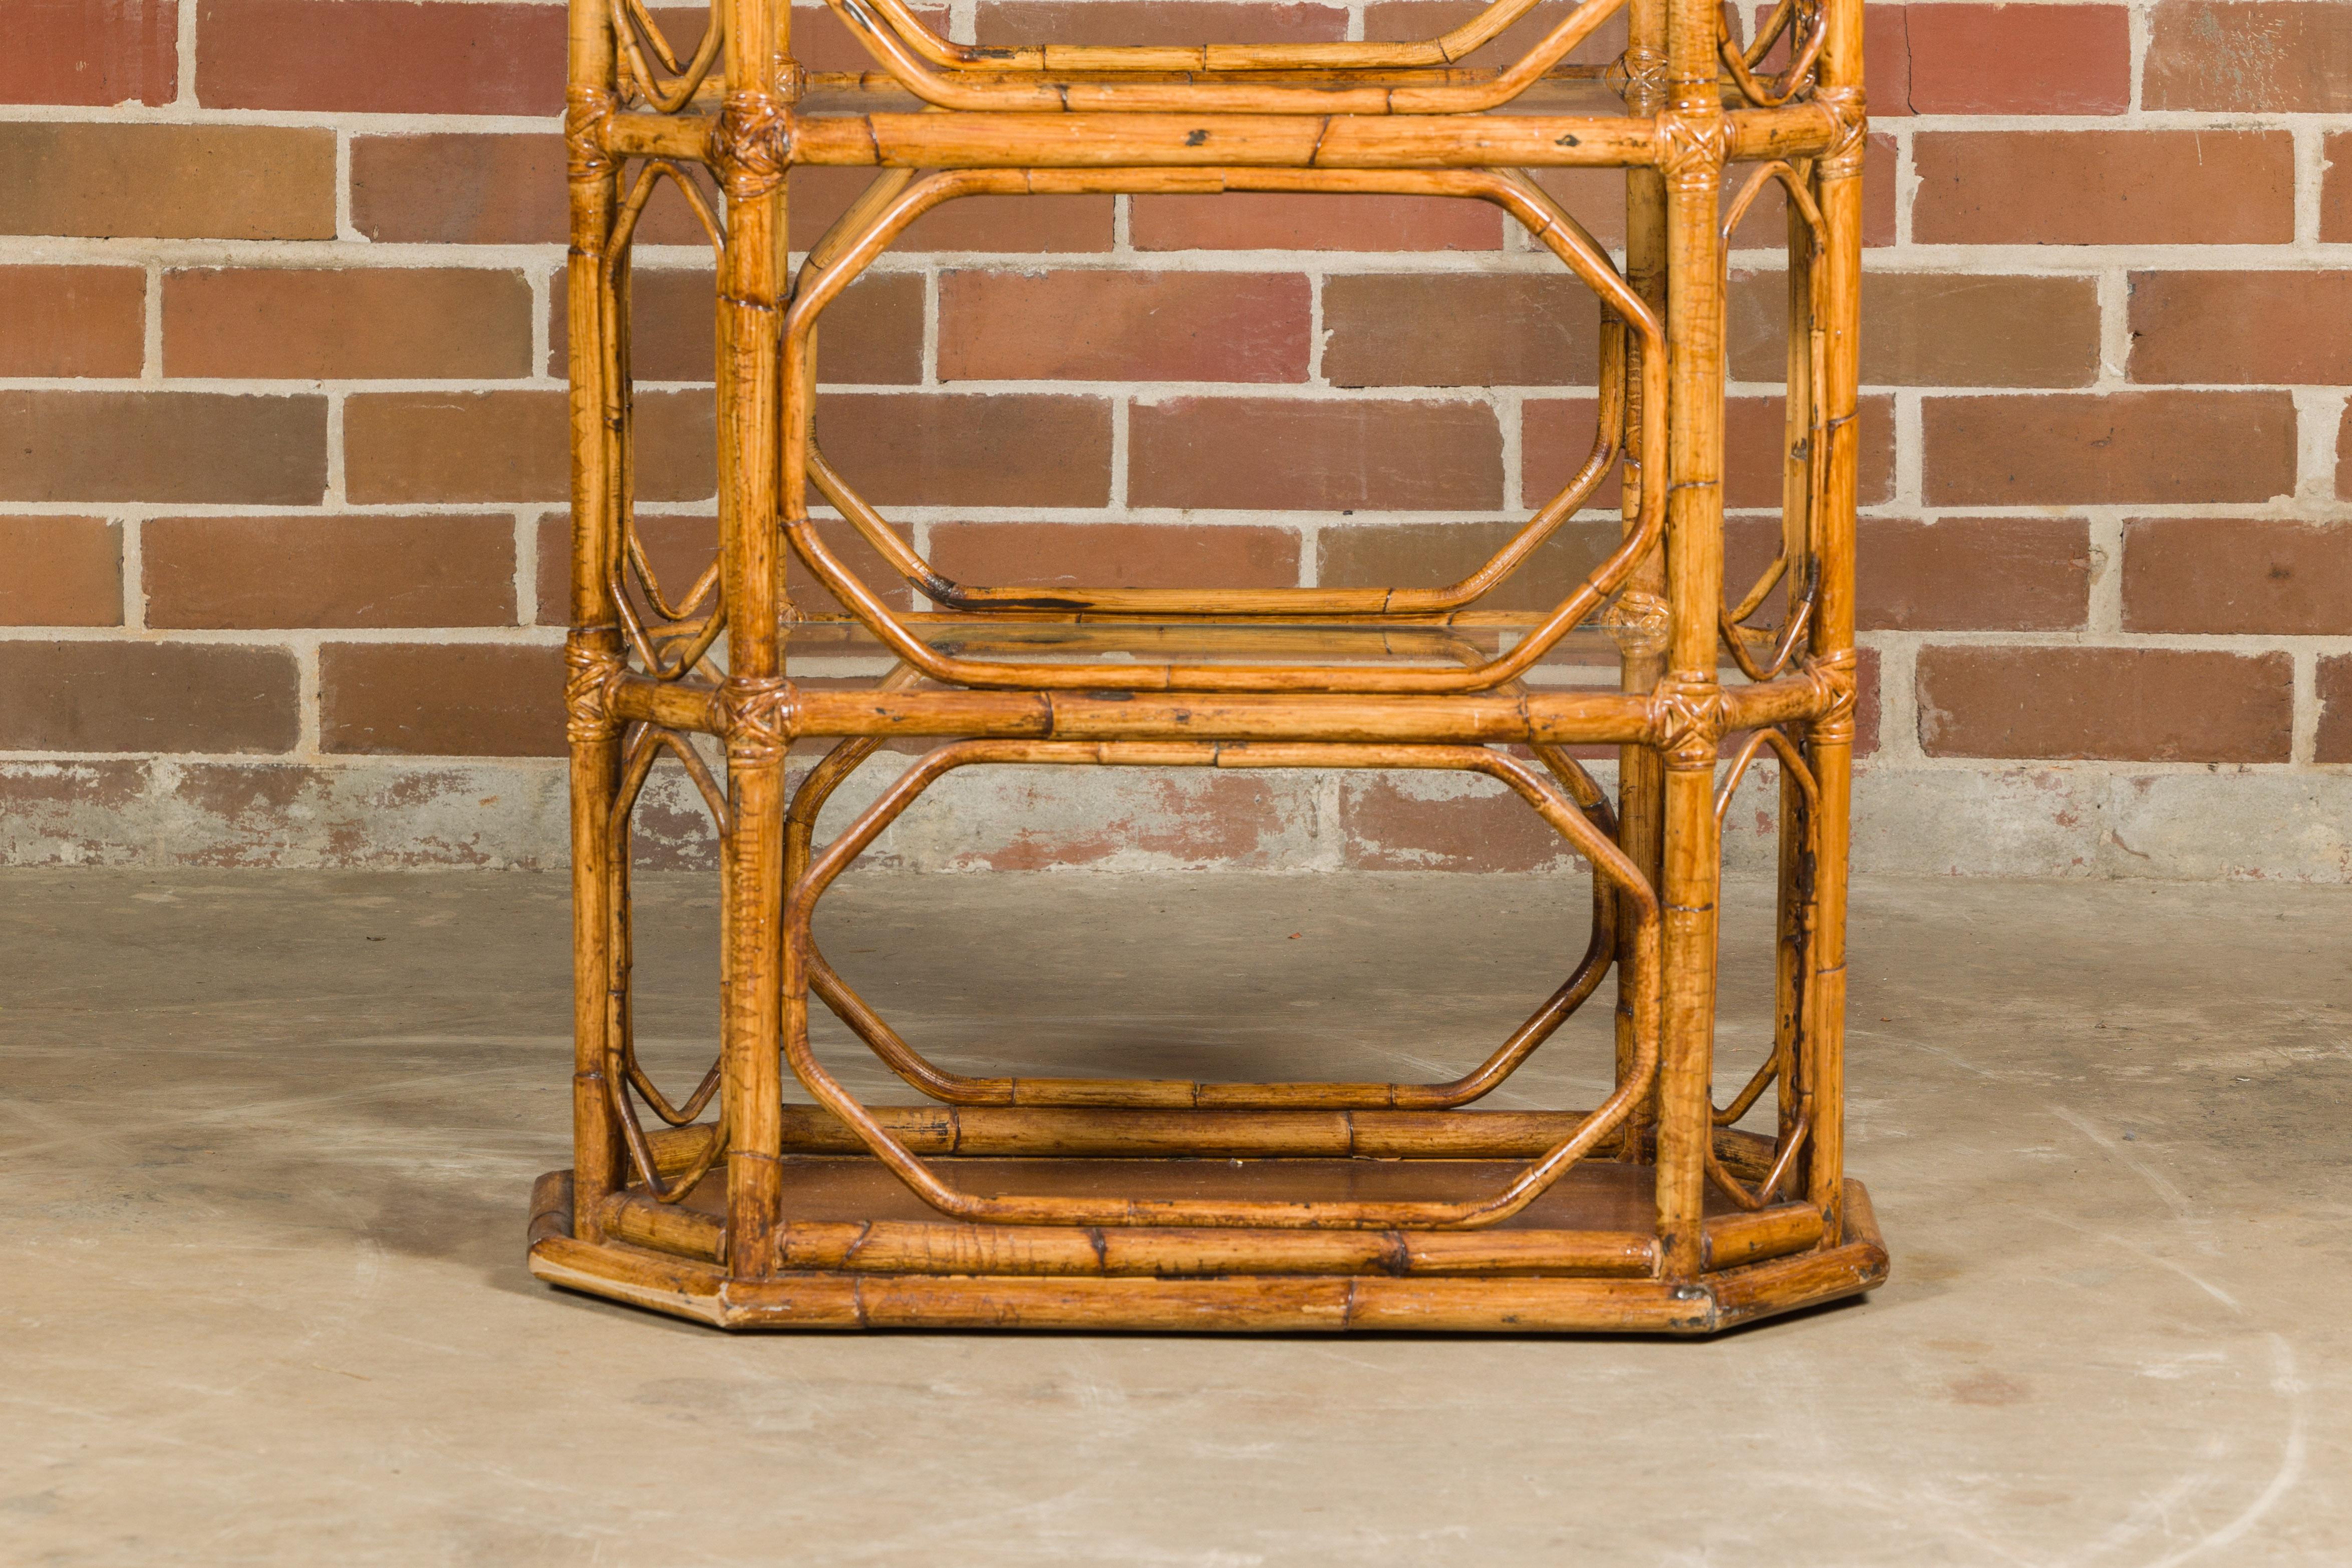 20th Century Midcentury Bamboo and Glass Etagère with Five Shelves and Geometric Accents For Sale